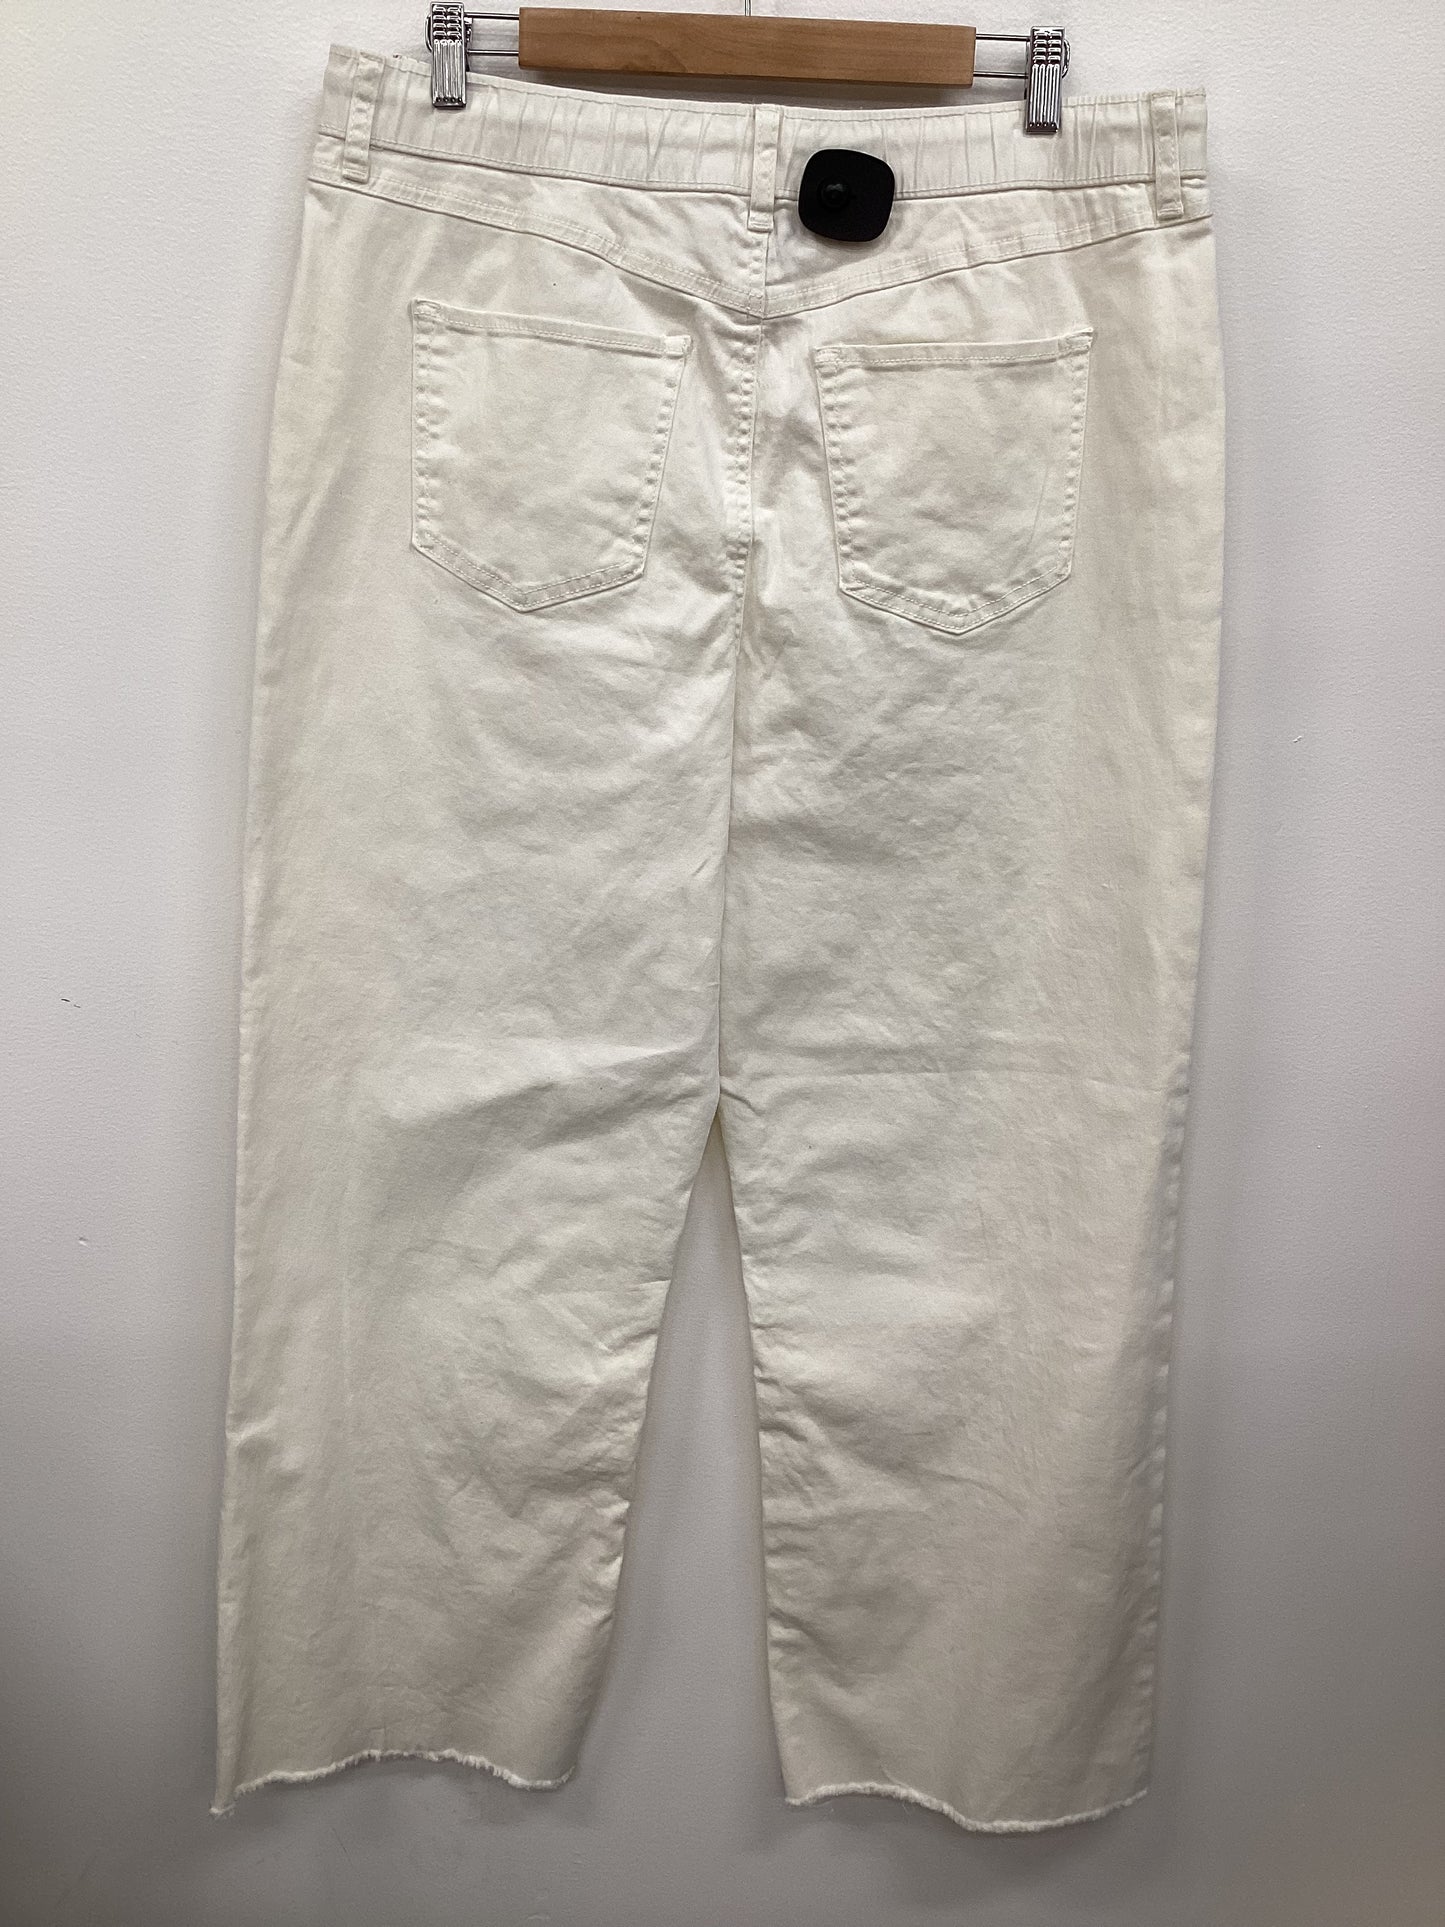 Pants Ankle By Clothes Mentor  Size: 16